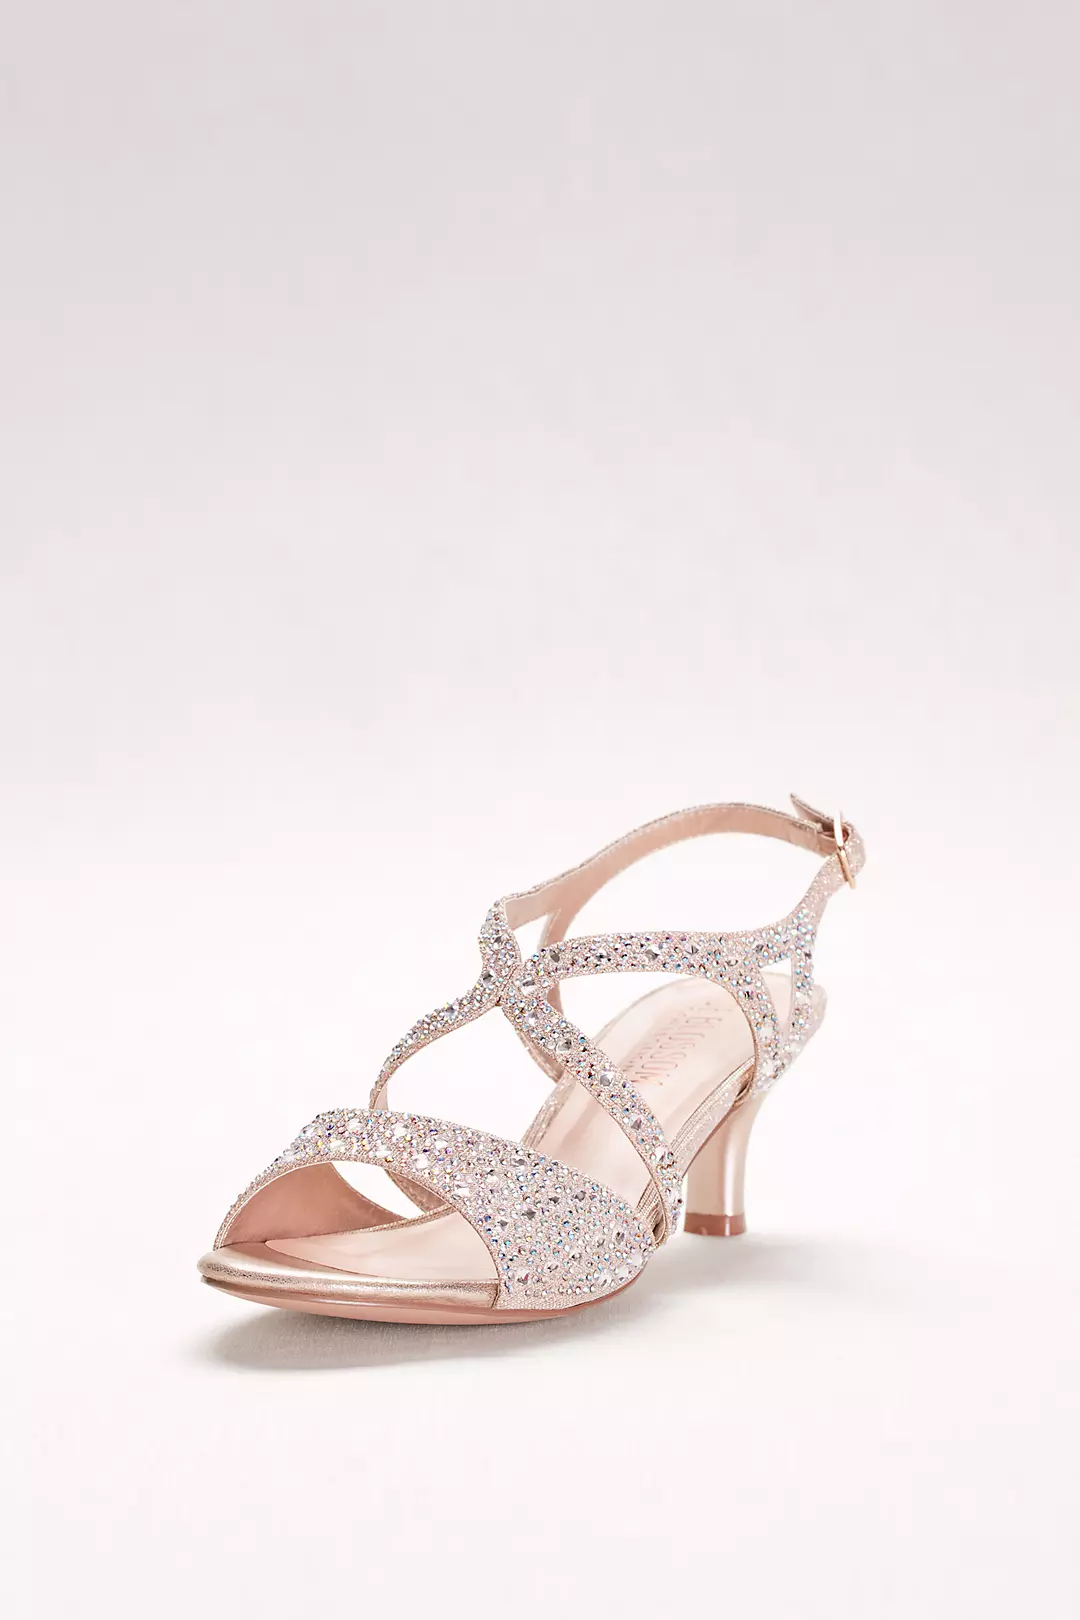 Strappy Heels with Iridescent Gems Image